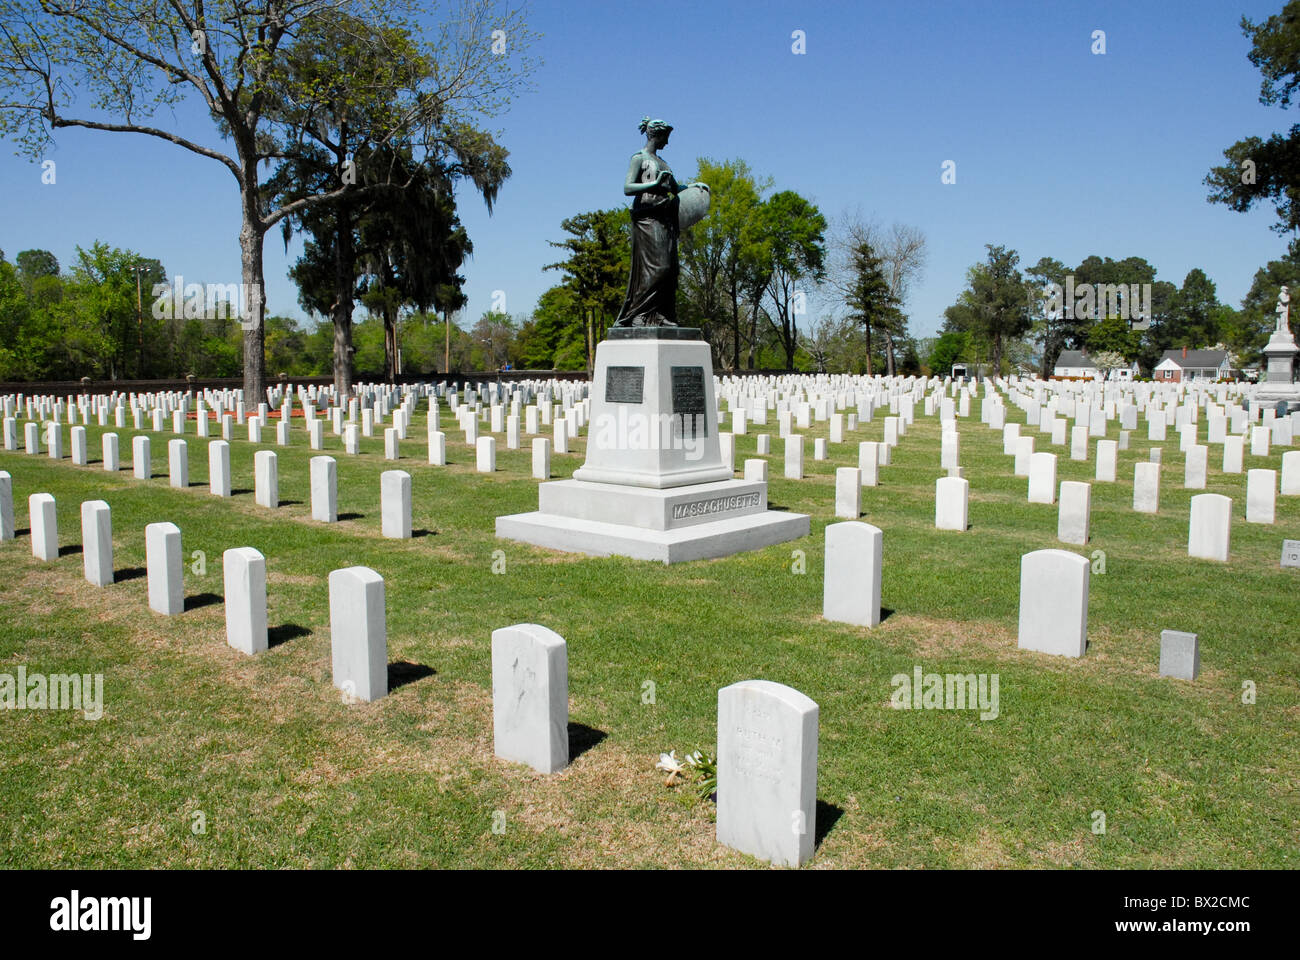 New Bern National Cemetery located in New Bern, NC, USA Stock Photo